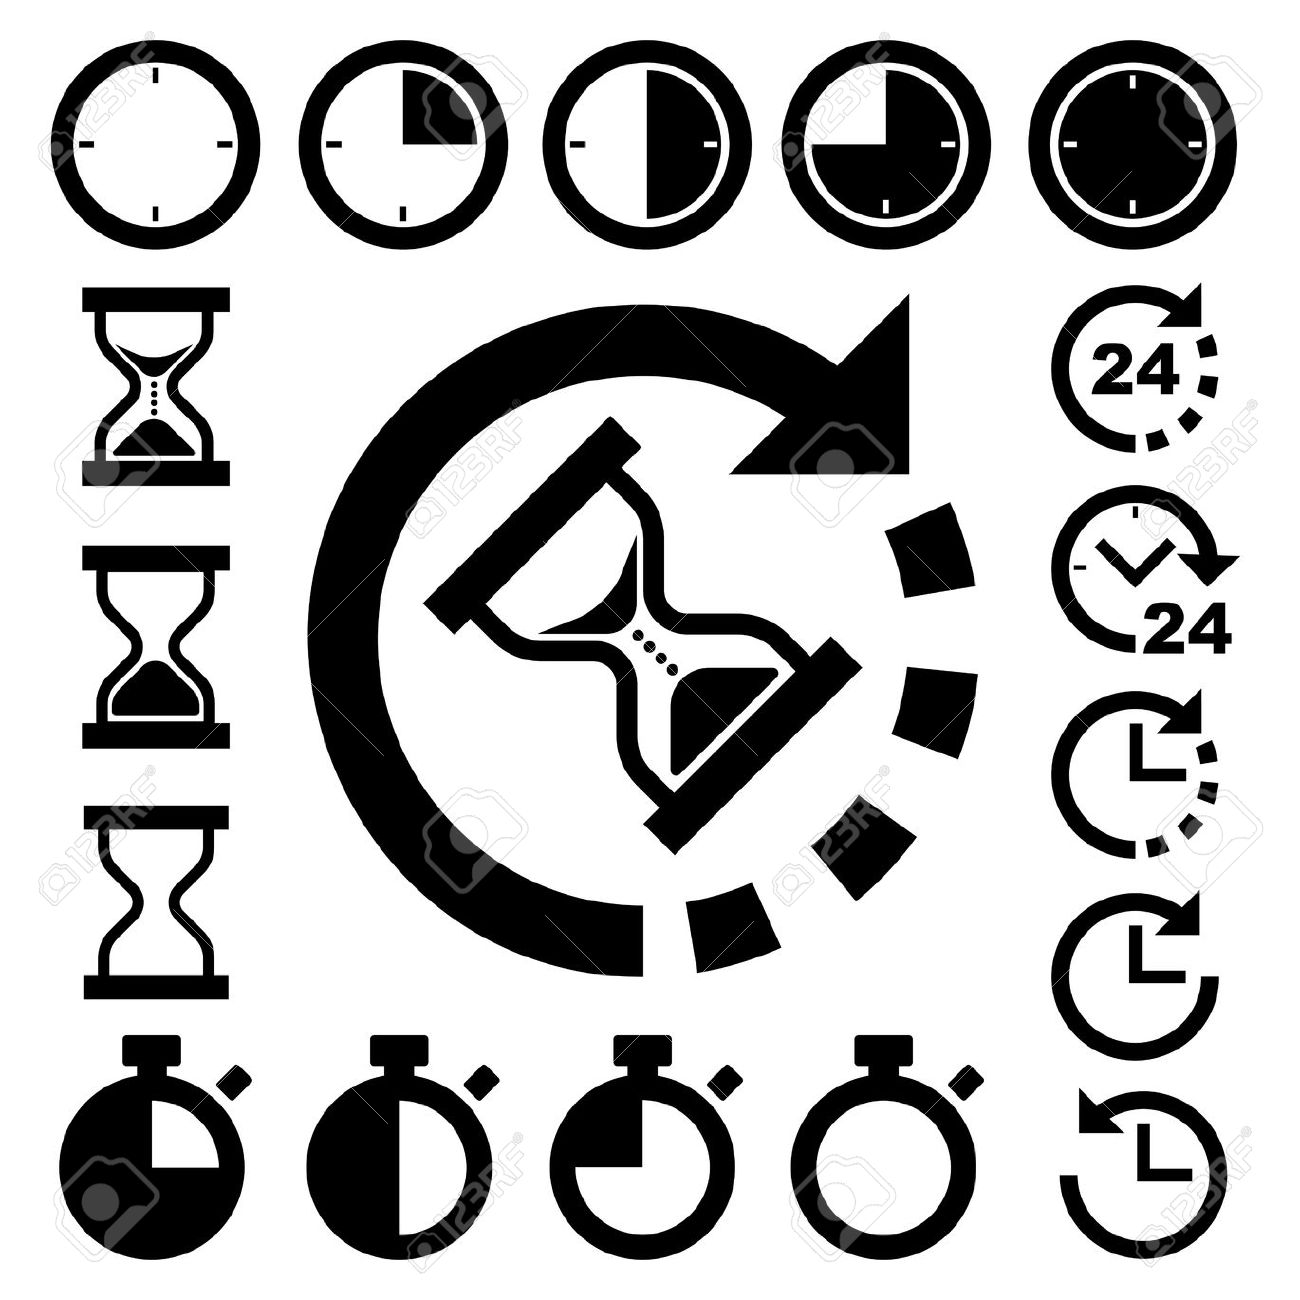 25867178-Clocks-and-time-icons-set-Stock-Vector-time-icon-hourglass.jpg